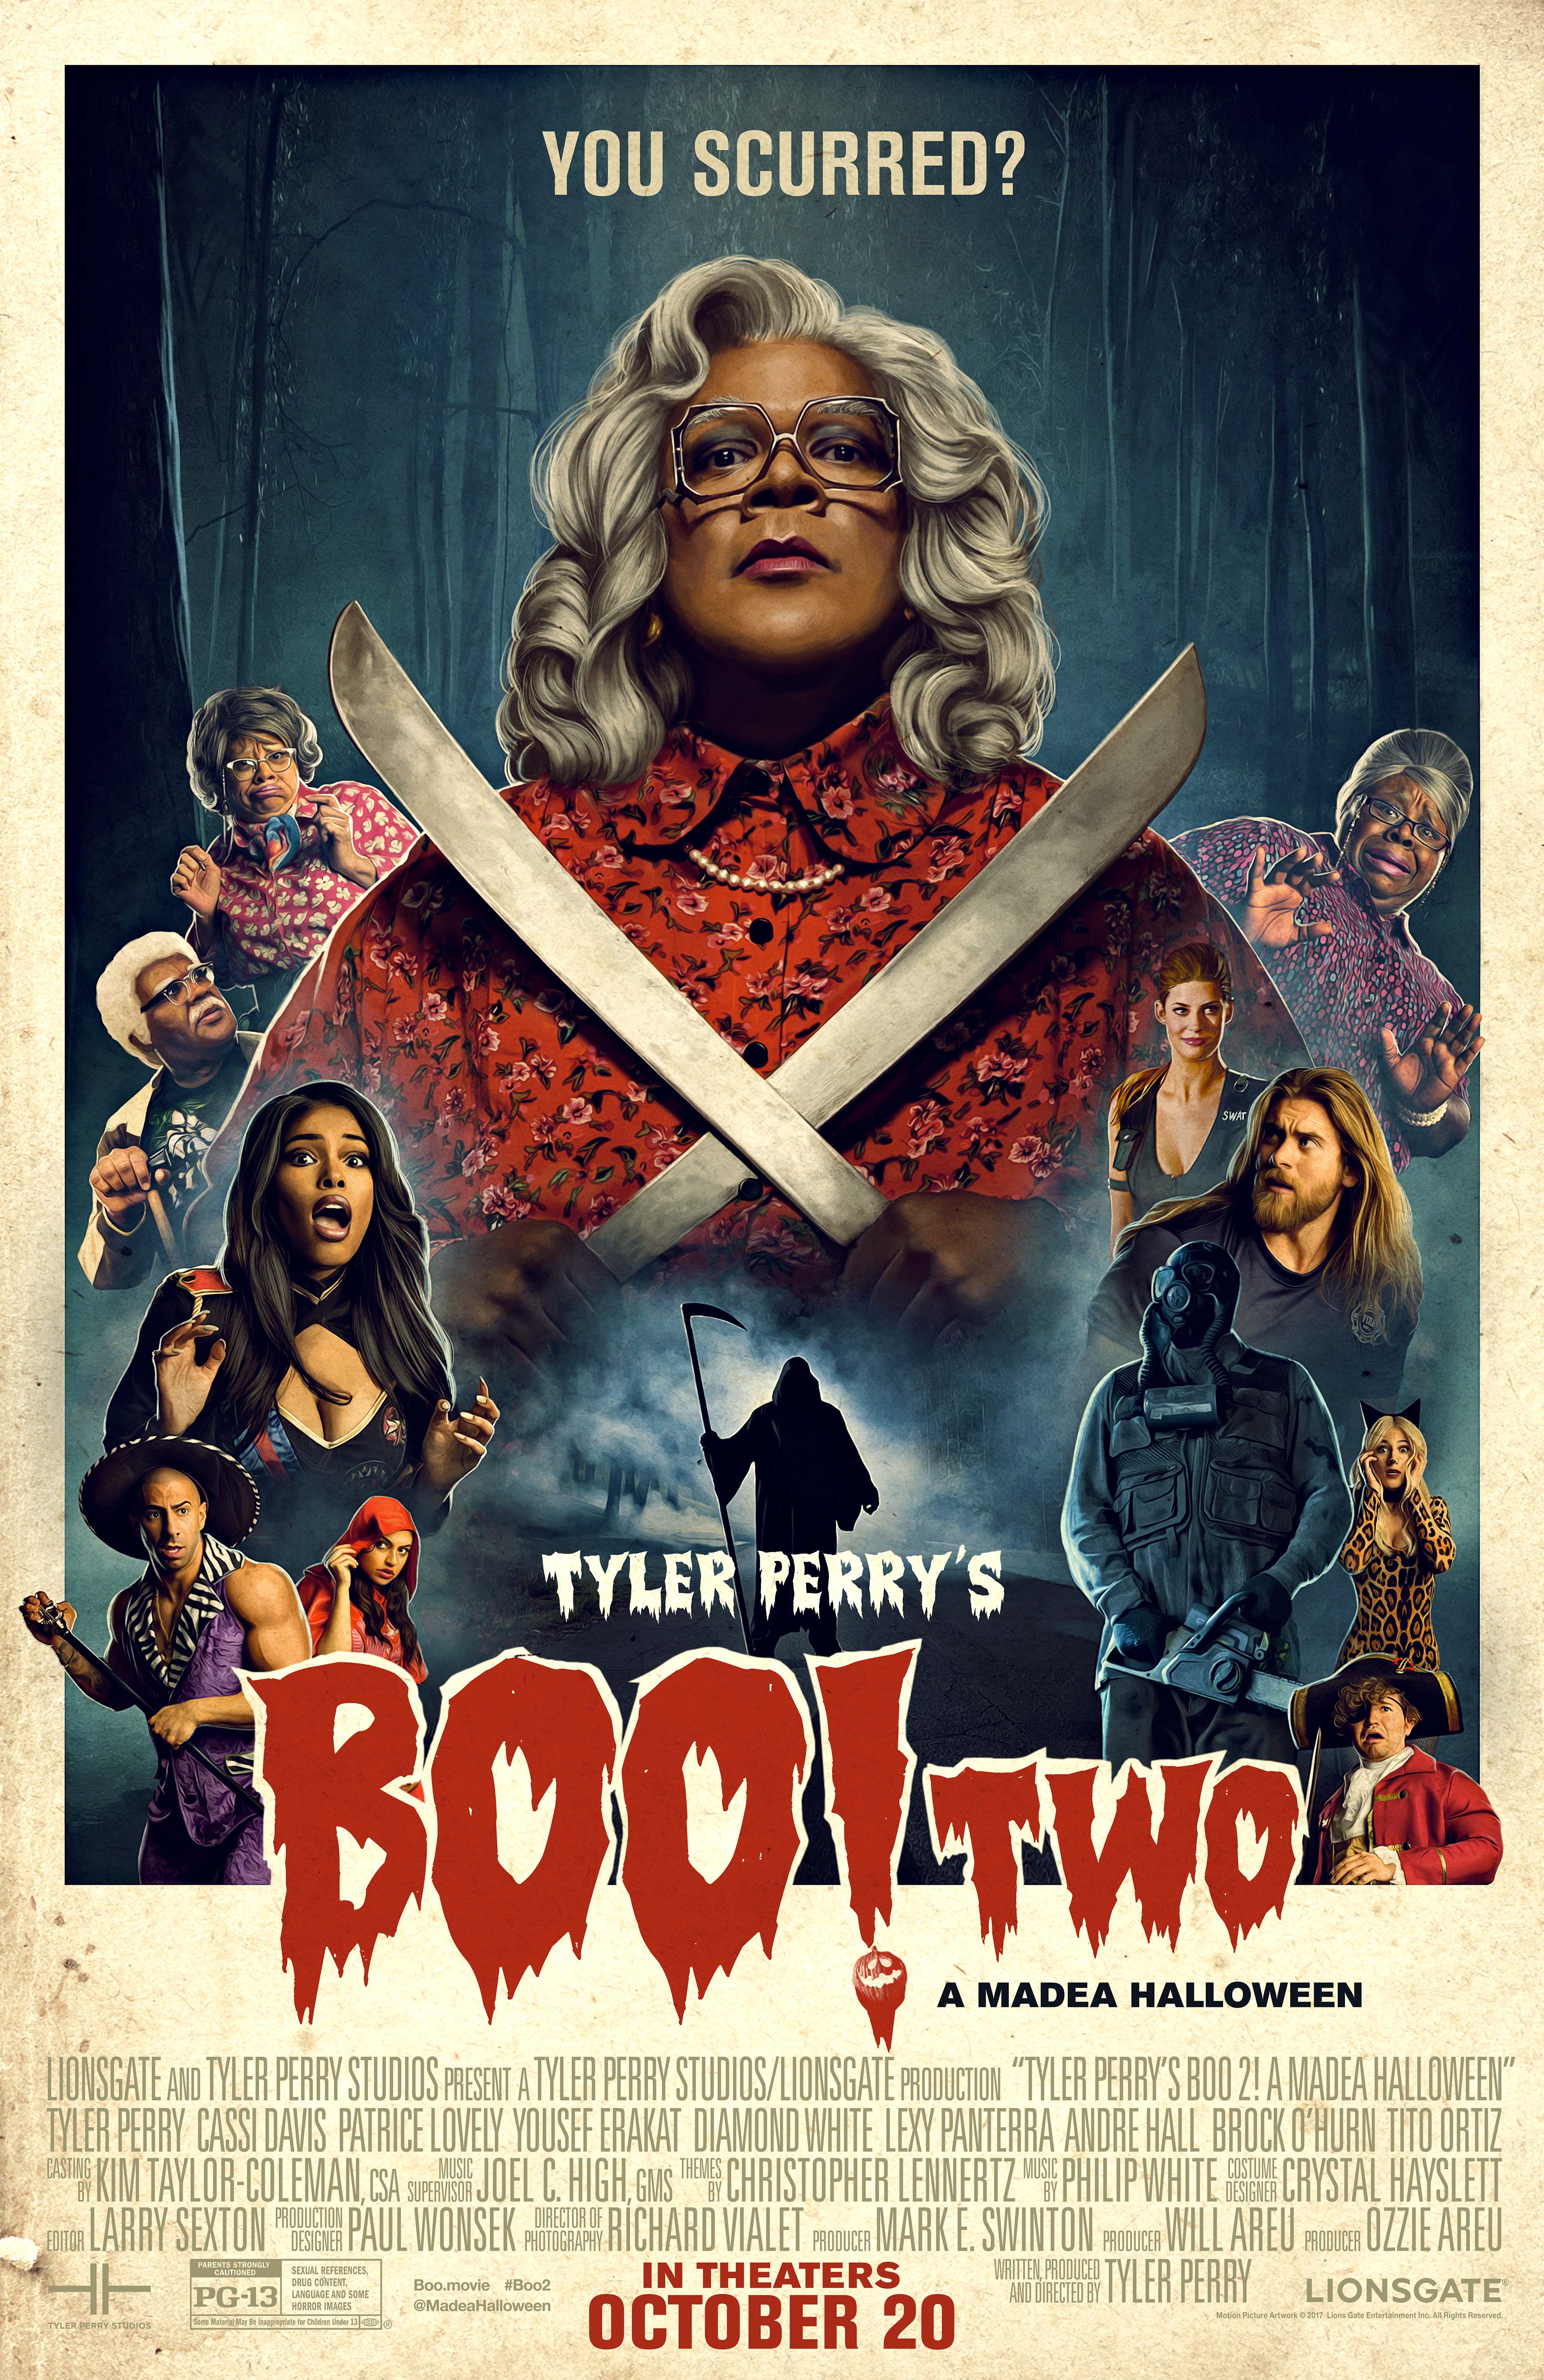 Tyler Perry's BOO 2! A MADEA HALLOWEEN. In theaters October 20